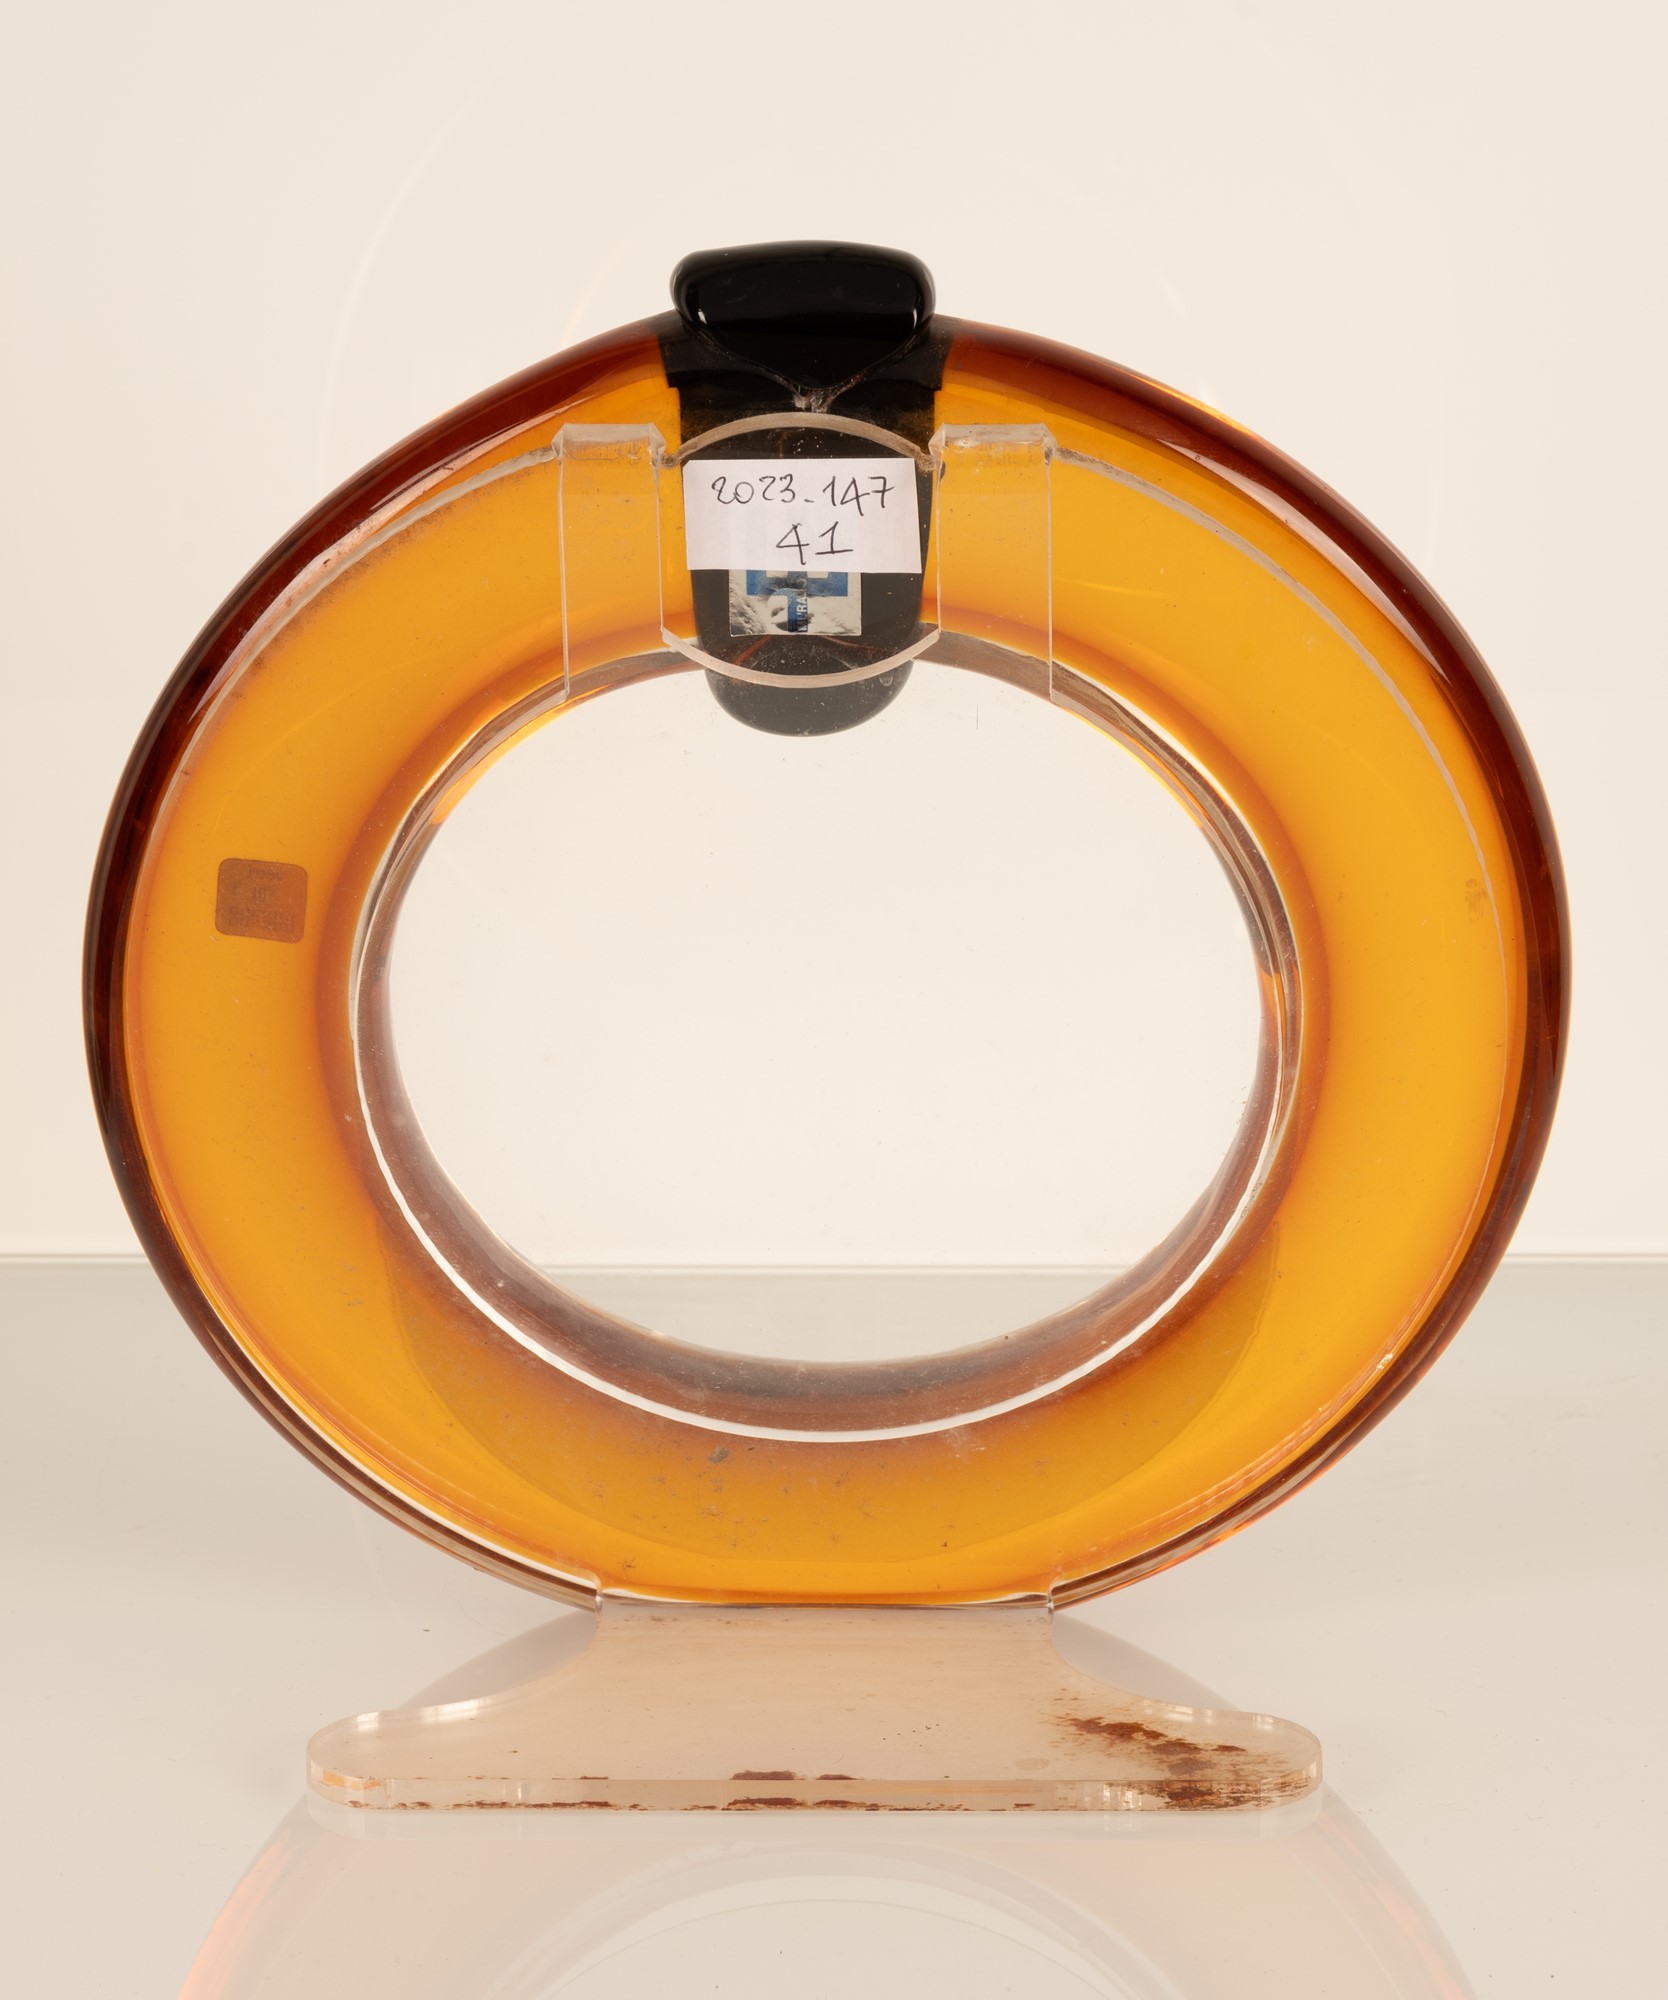 Vintage round photo frame in Murano glass in shades of Amber - Image 8 of 19